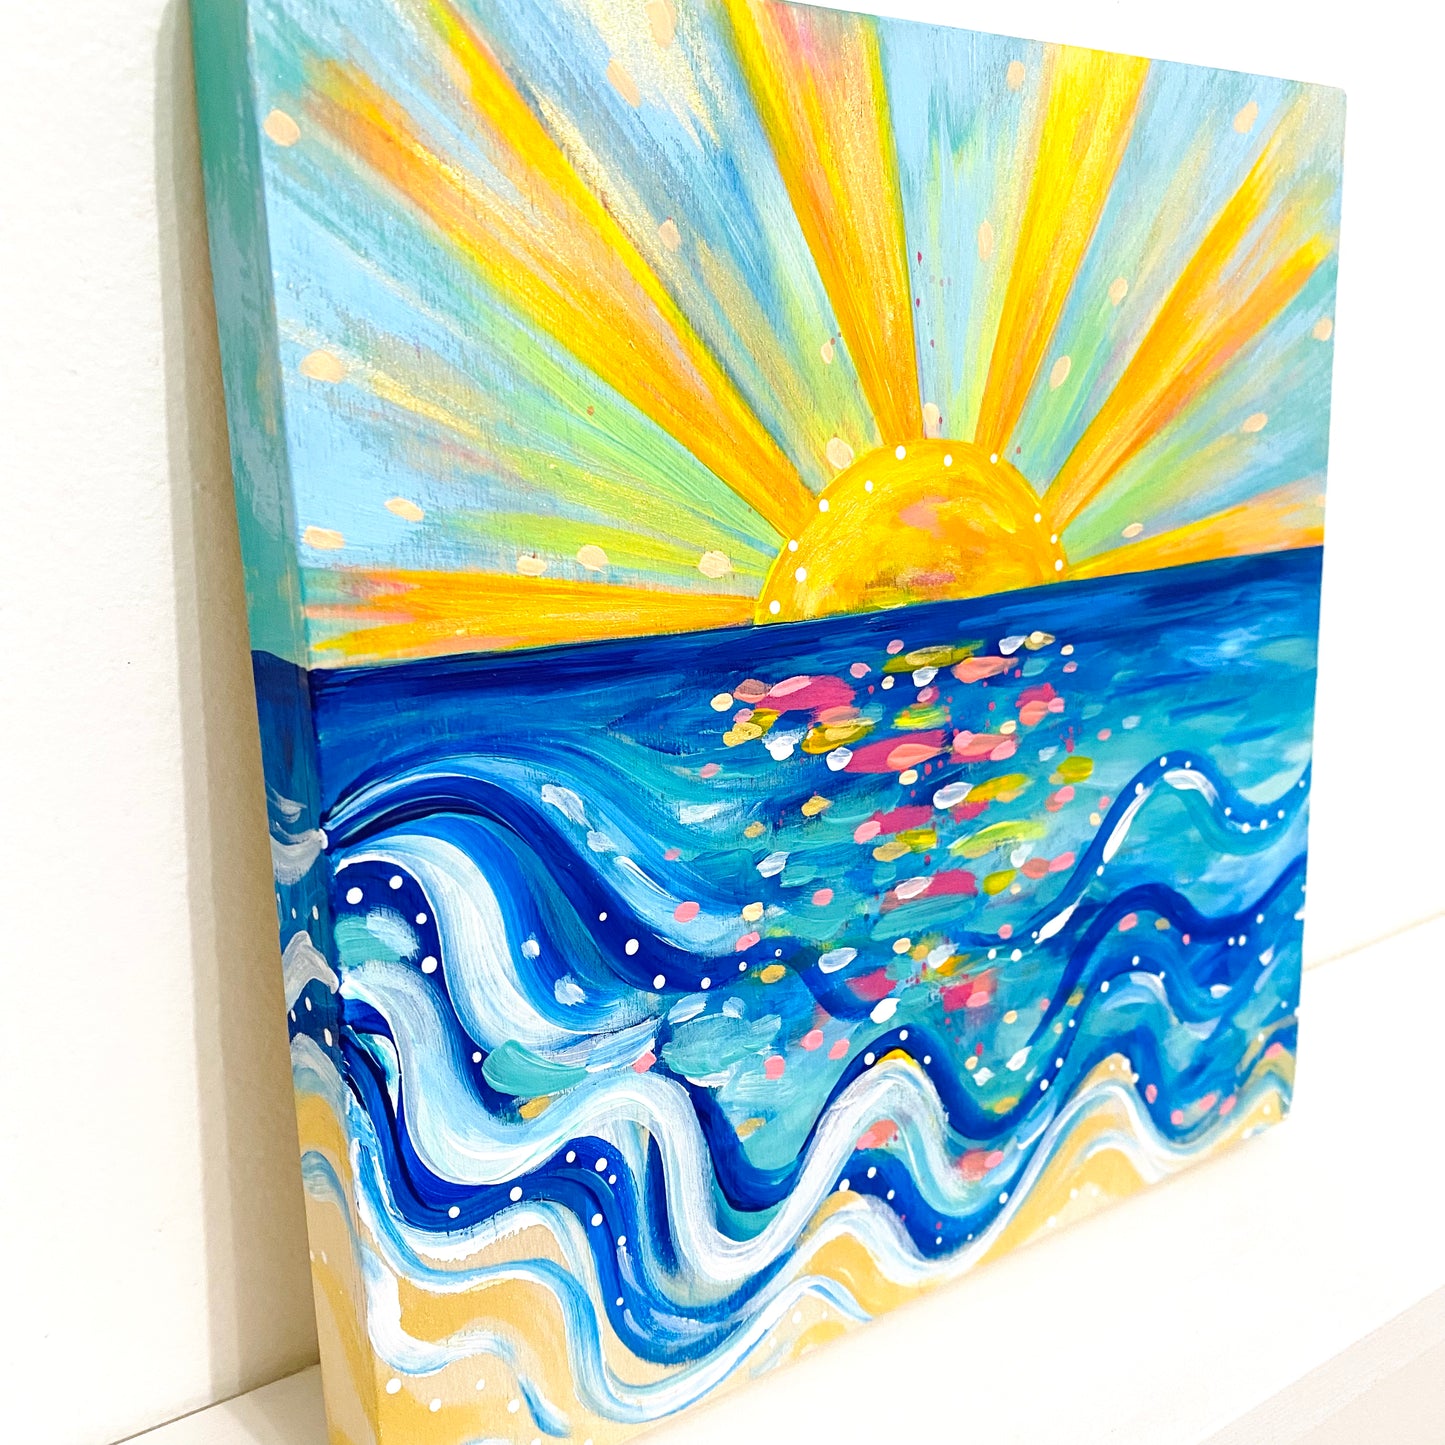 "Endless Sunshine" 8x8 inch Original Coastal Inspired Painting on Wood Panel with painted sides